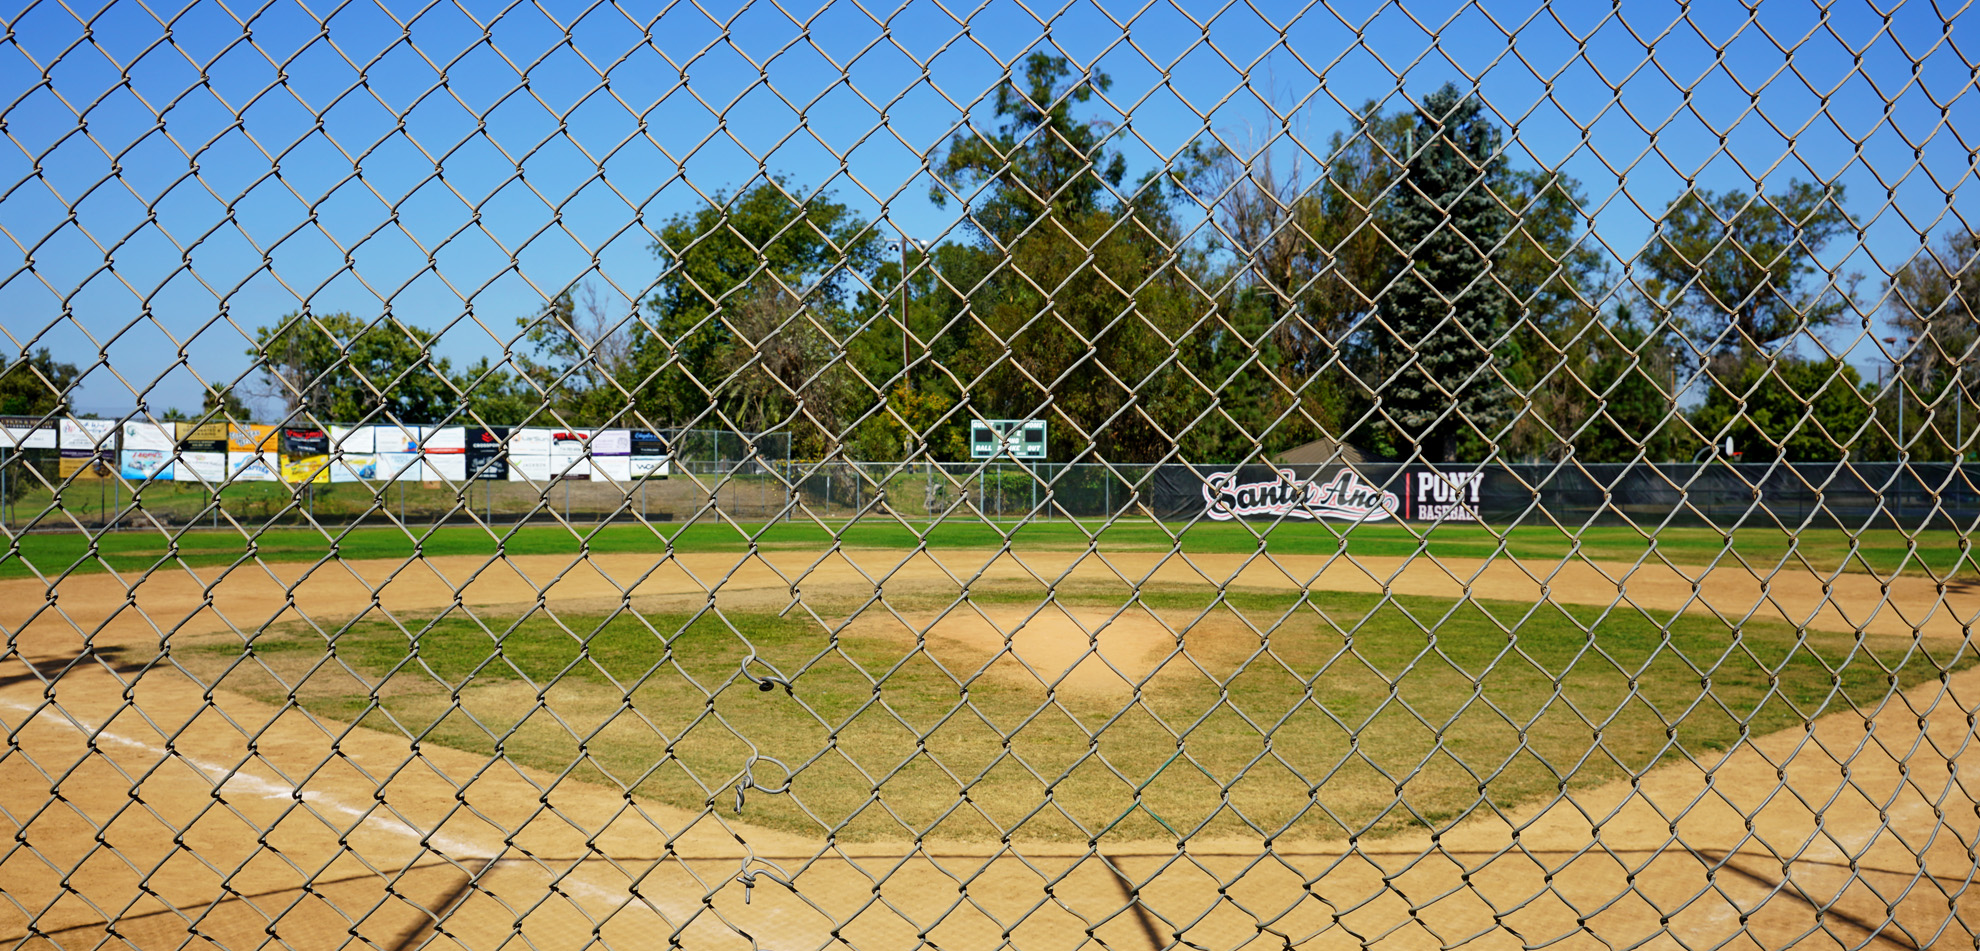 ball diamond front view at Riverview park